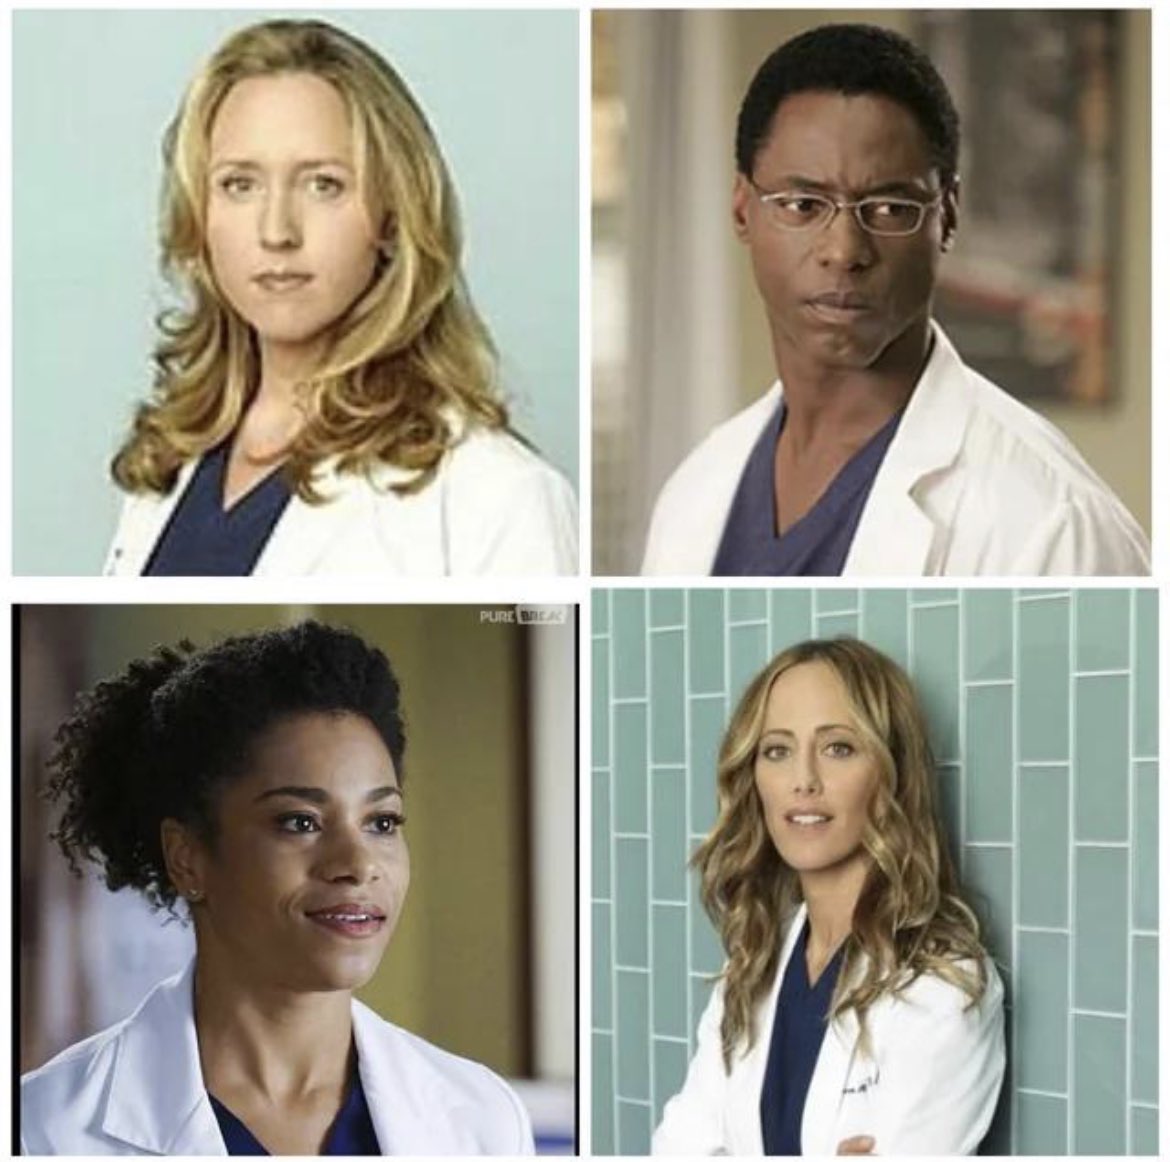 Who is the best Cardiothoracic teacher in grey's (to Christina and even others)?